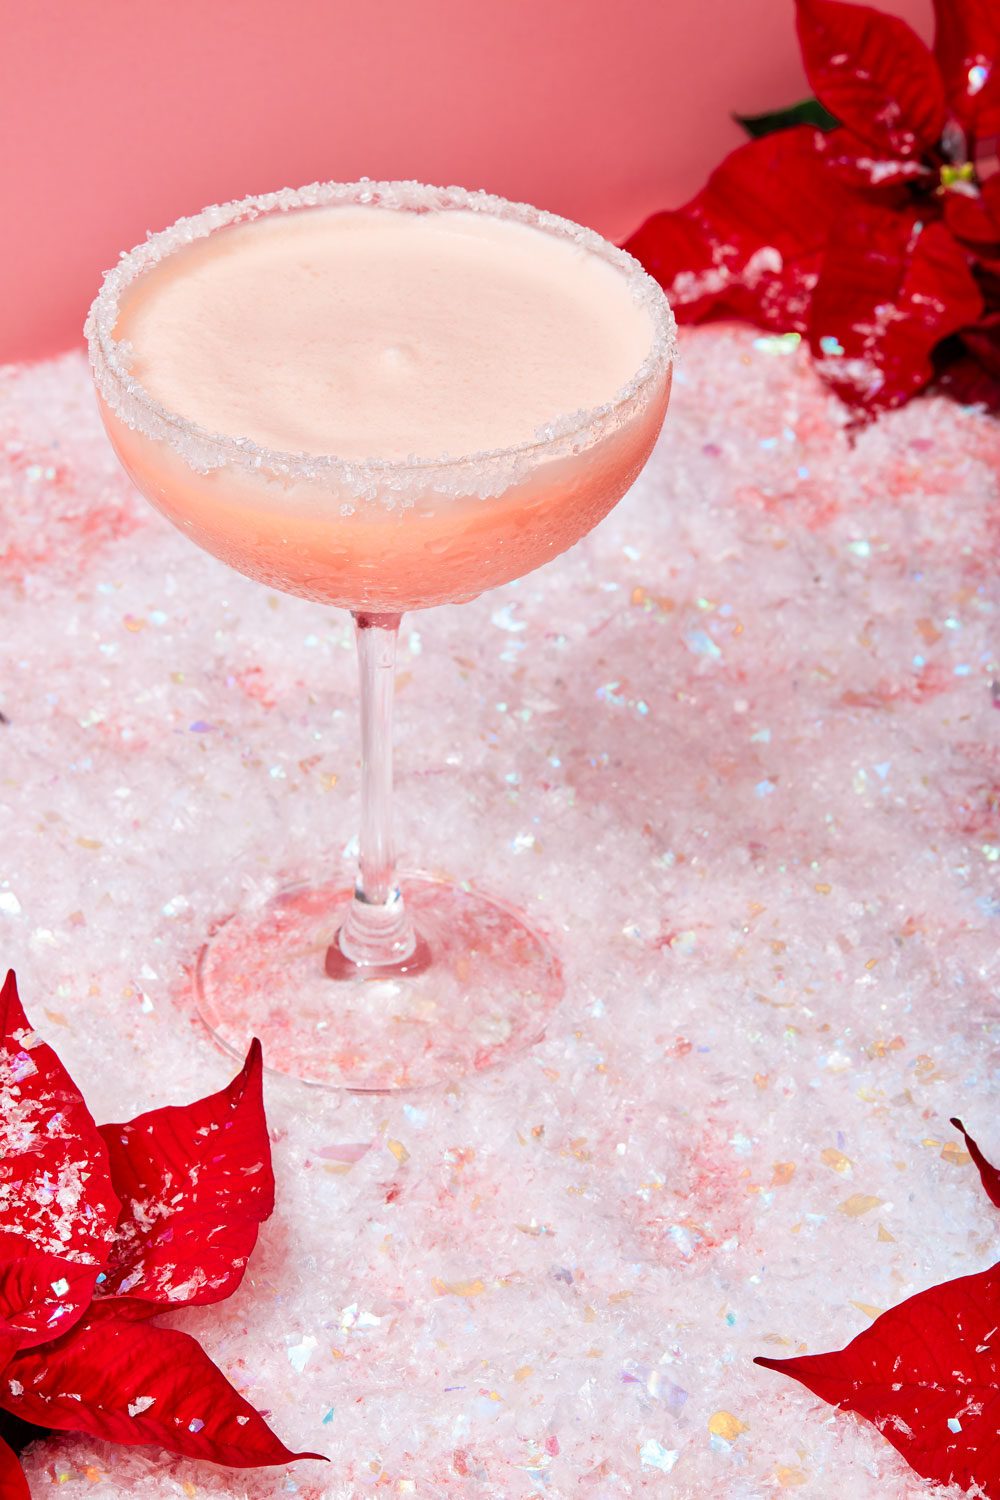 Strawberry Cream Cocktail with Poinsettia